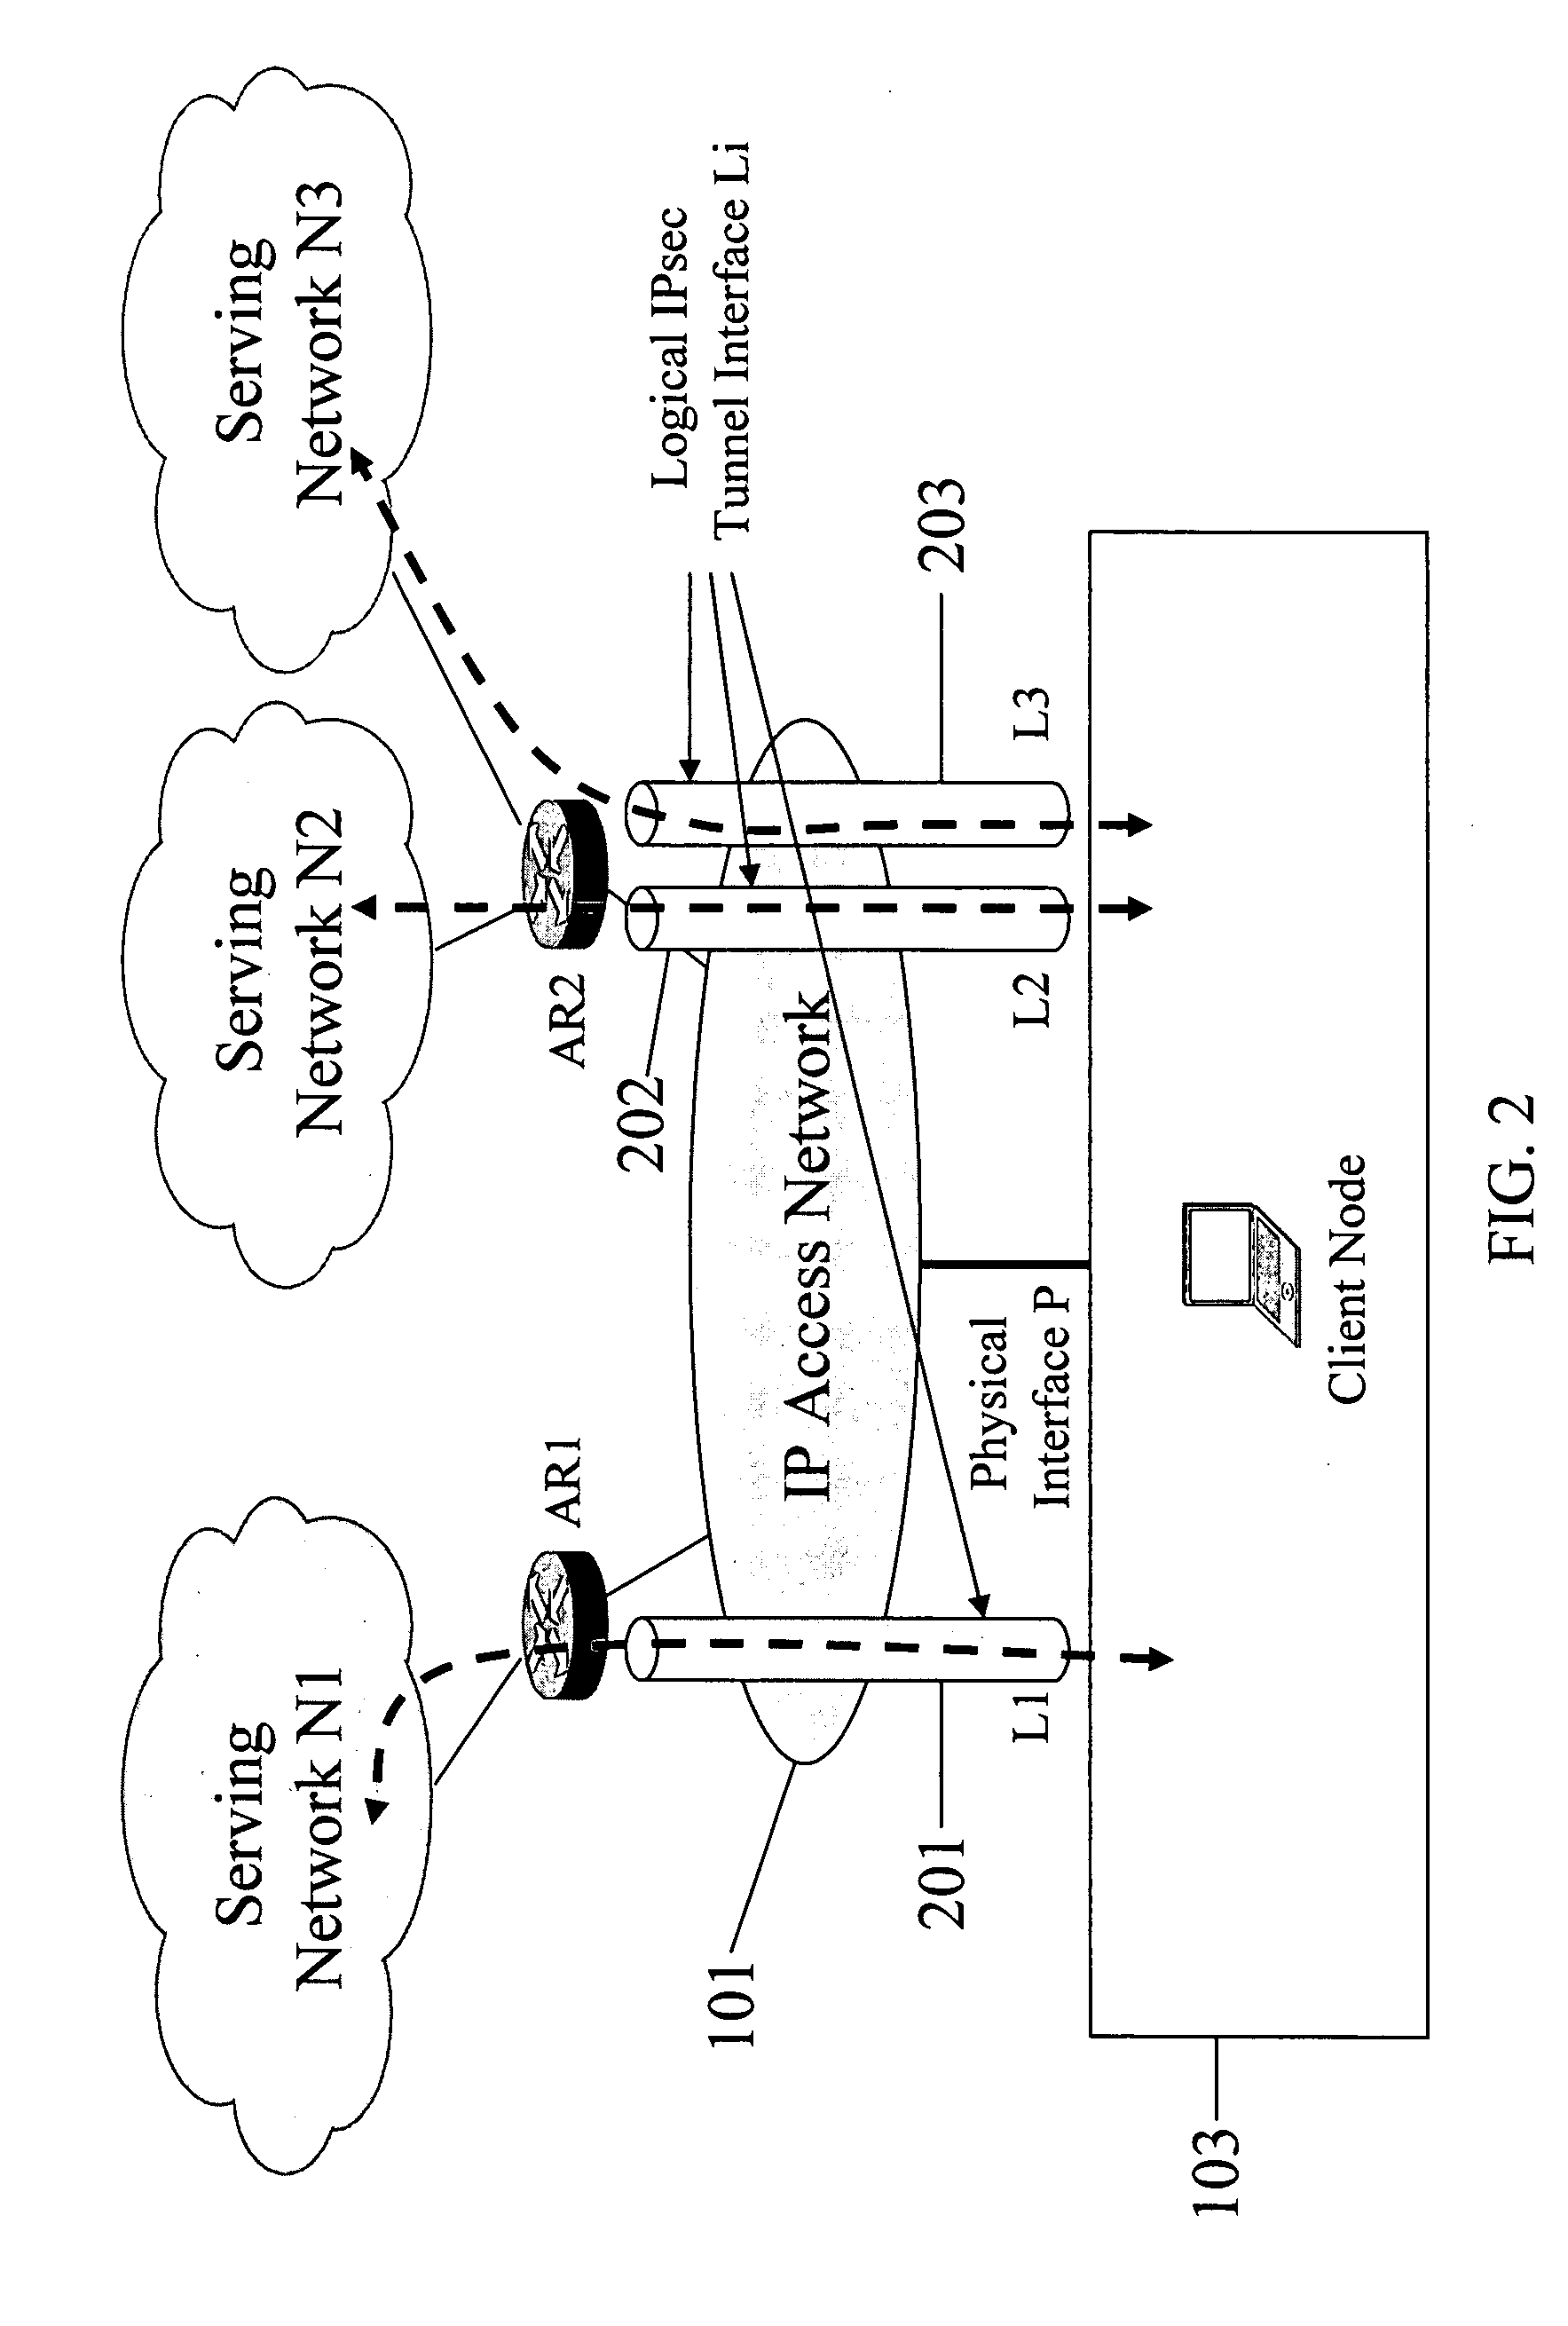 Serving network selection and multihoming using IP access network